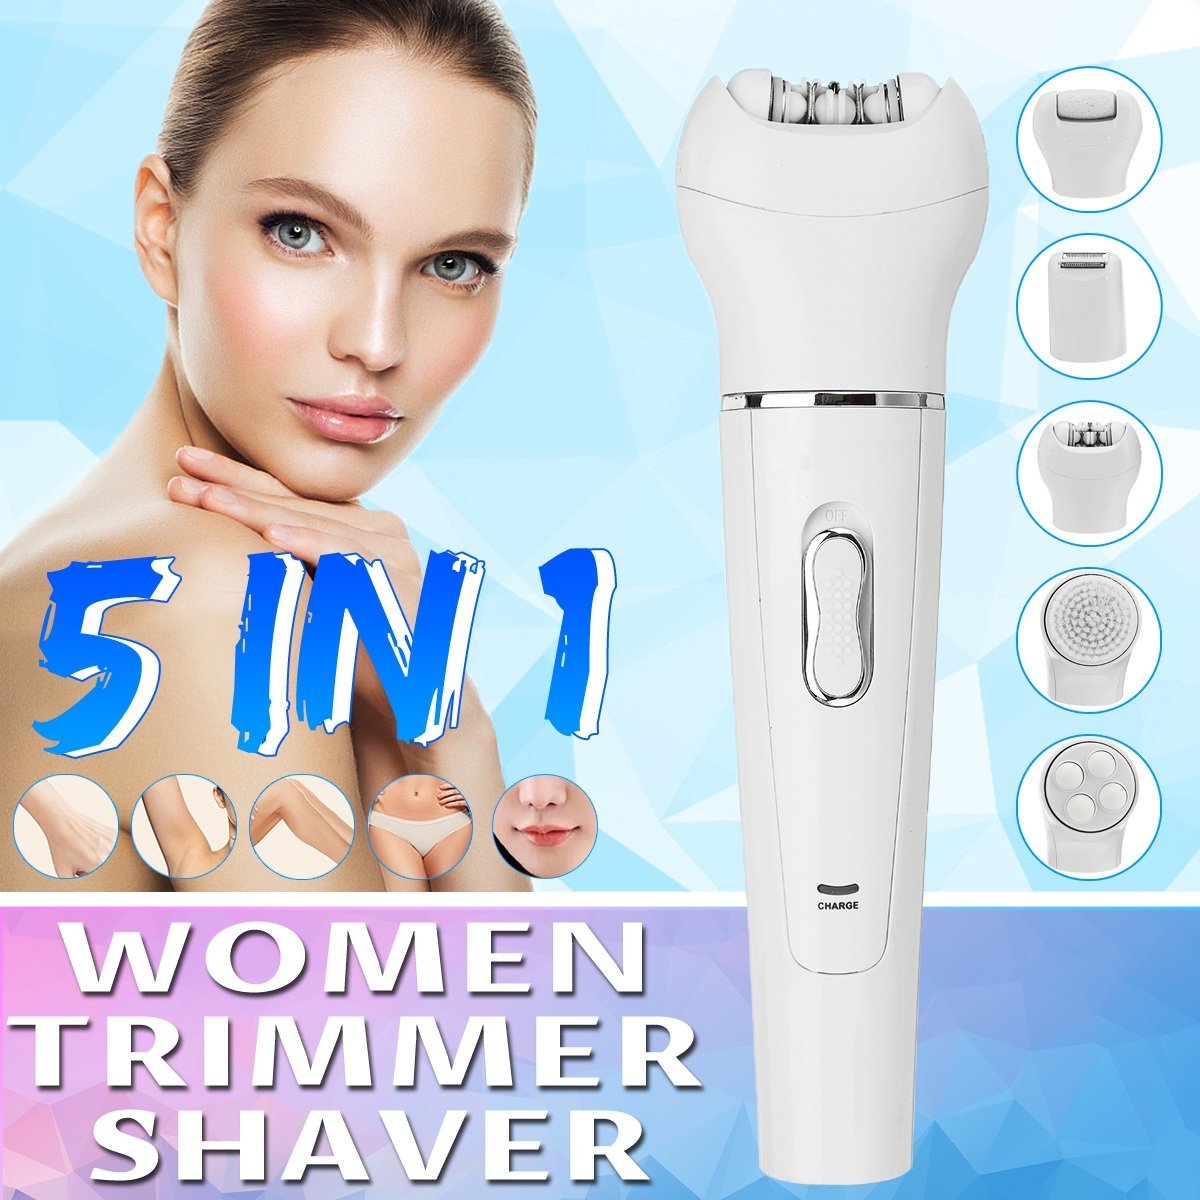 Hair Removal 5 in 1 Epilator with Facial Cleansing Brush Leg Shaver Bikini Trimmer Eyebrows Cordless Electric Skin Care